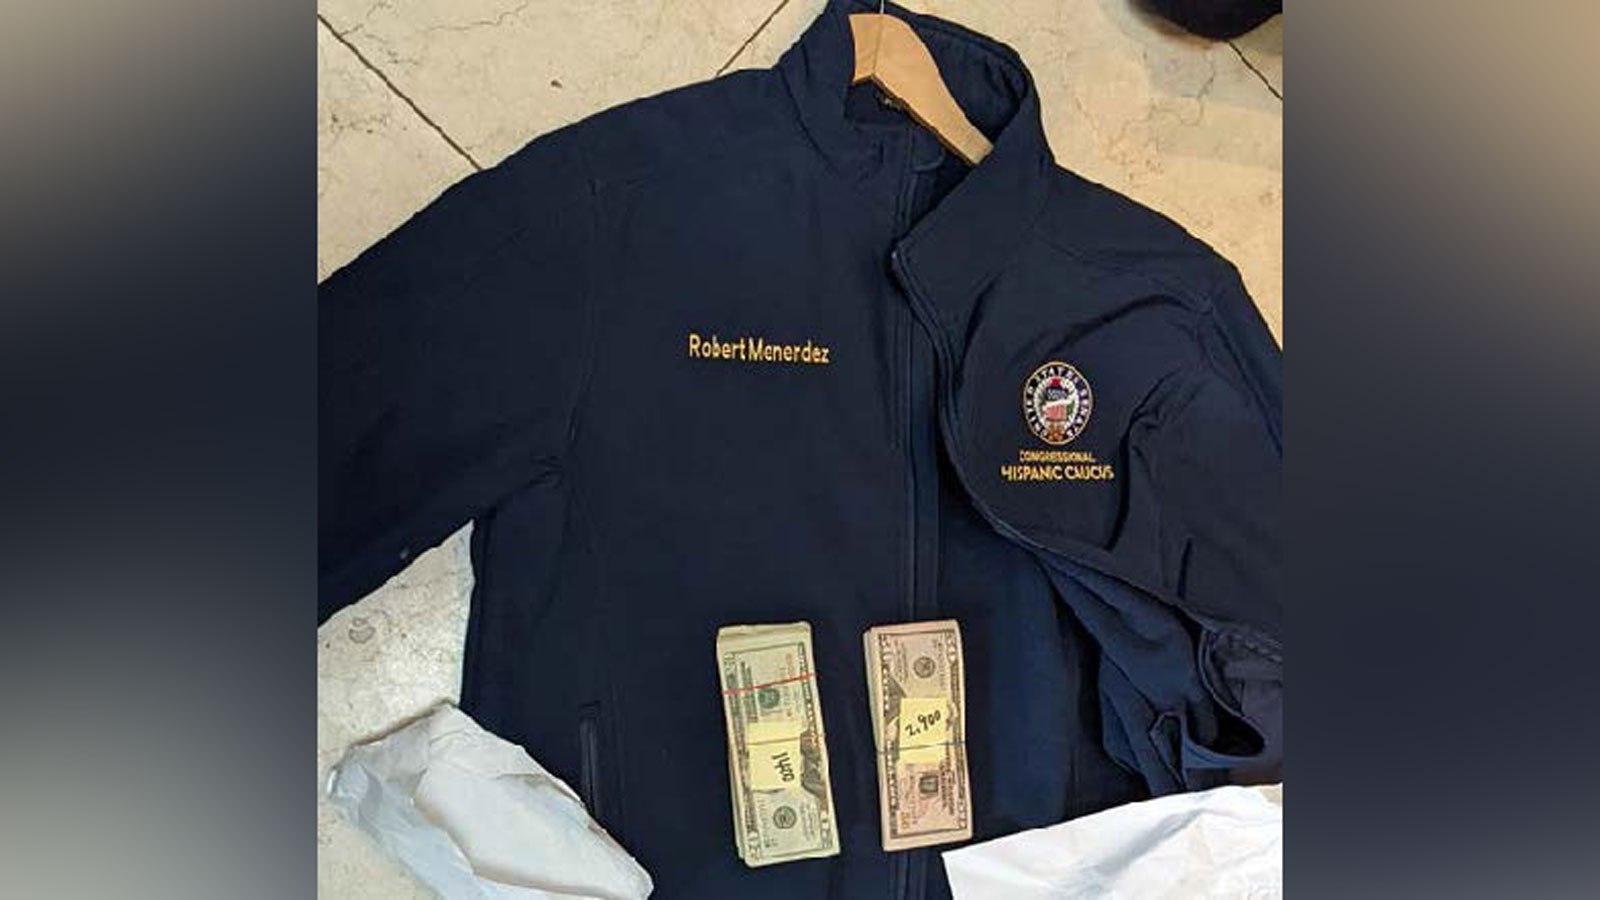 Cash was found inside this jacket with Menendez's name.